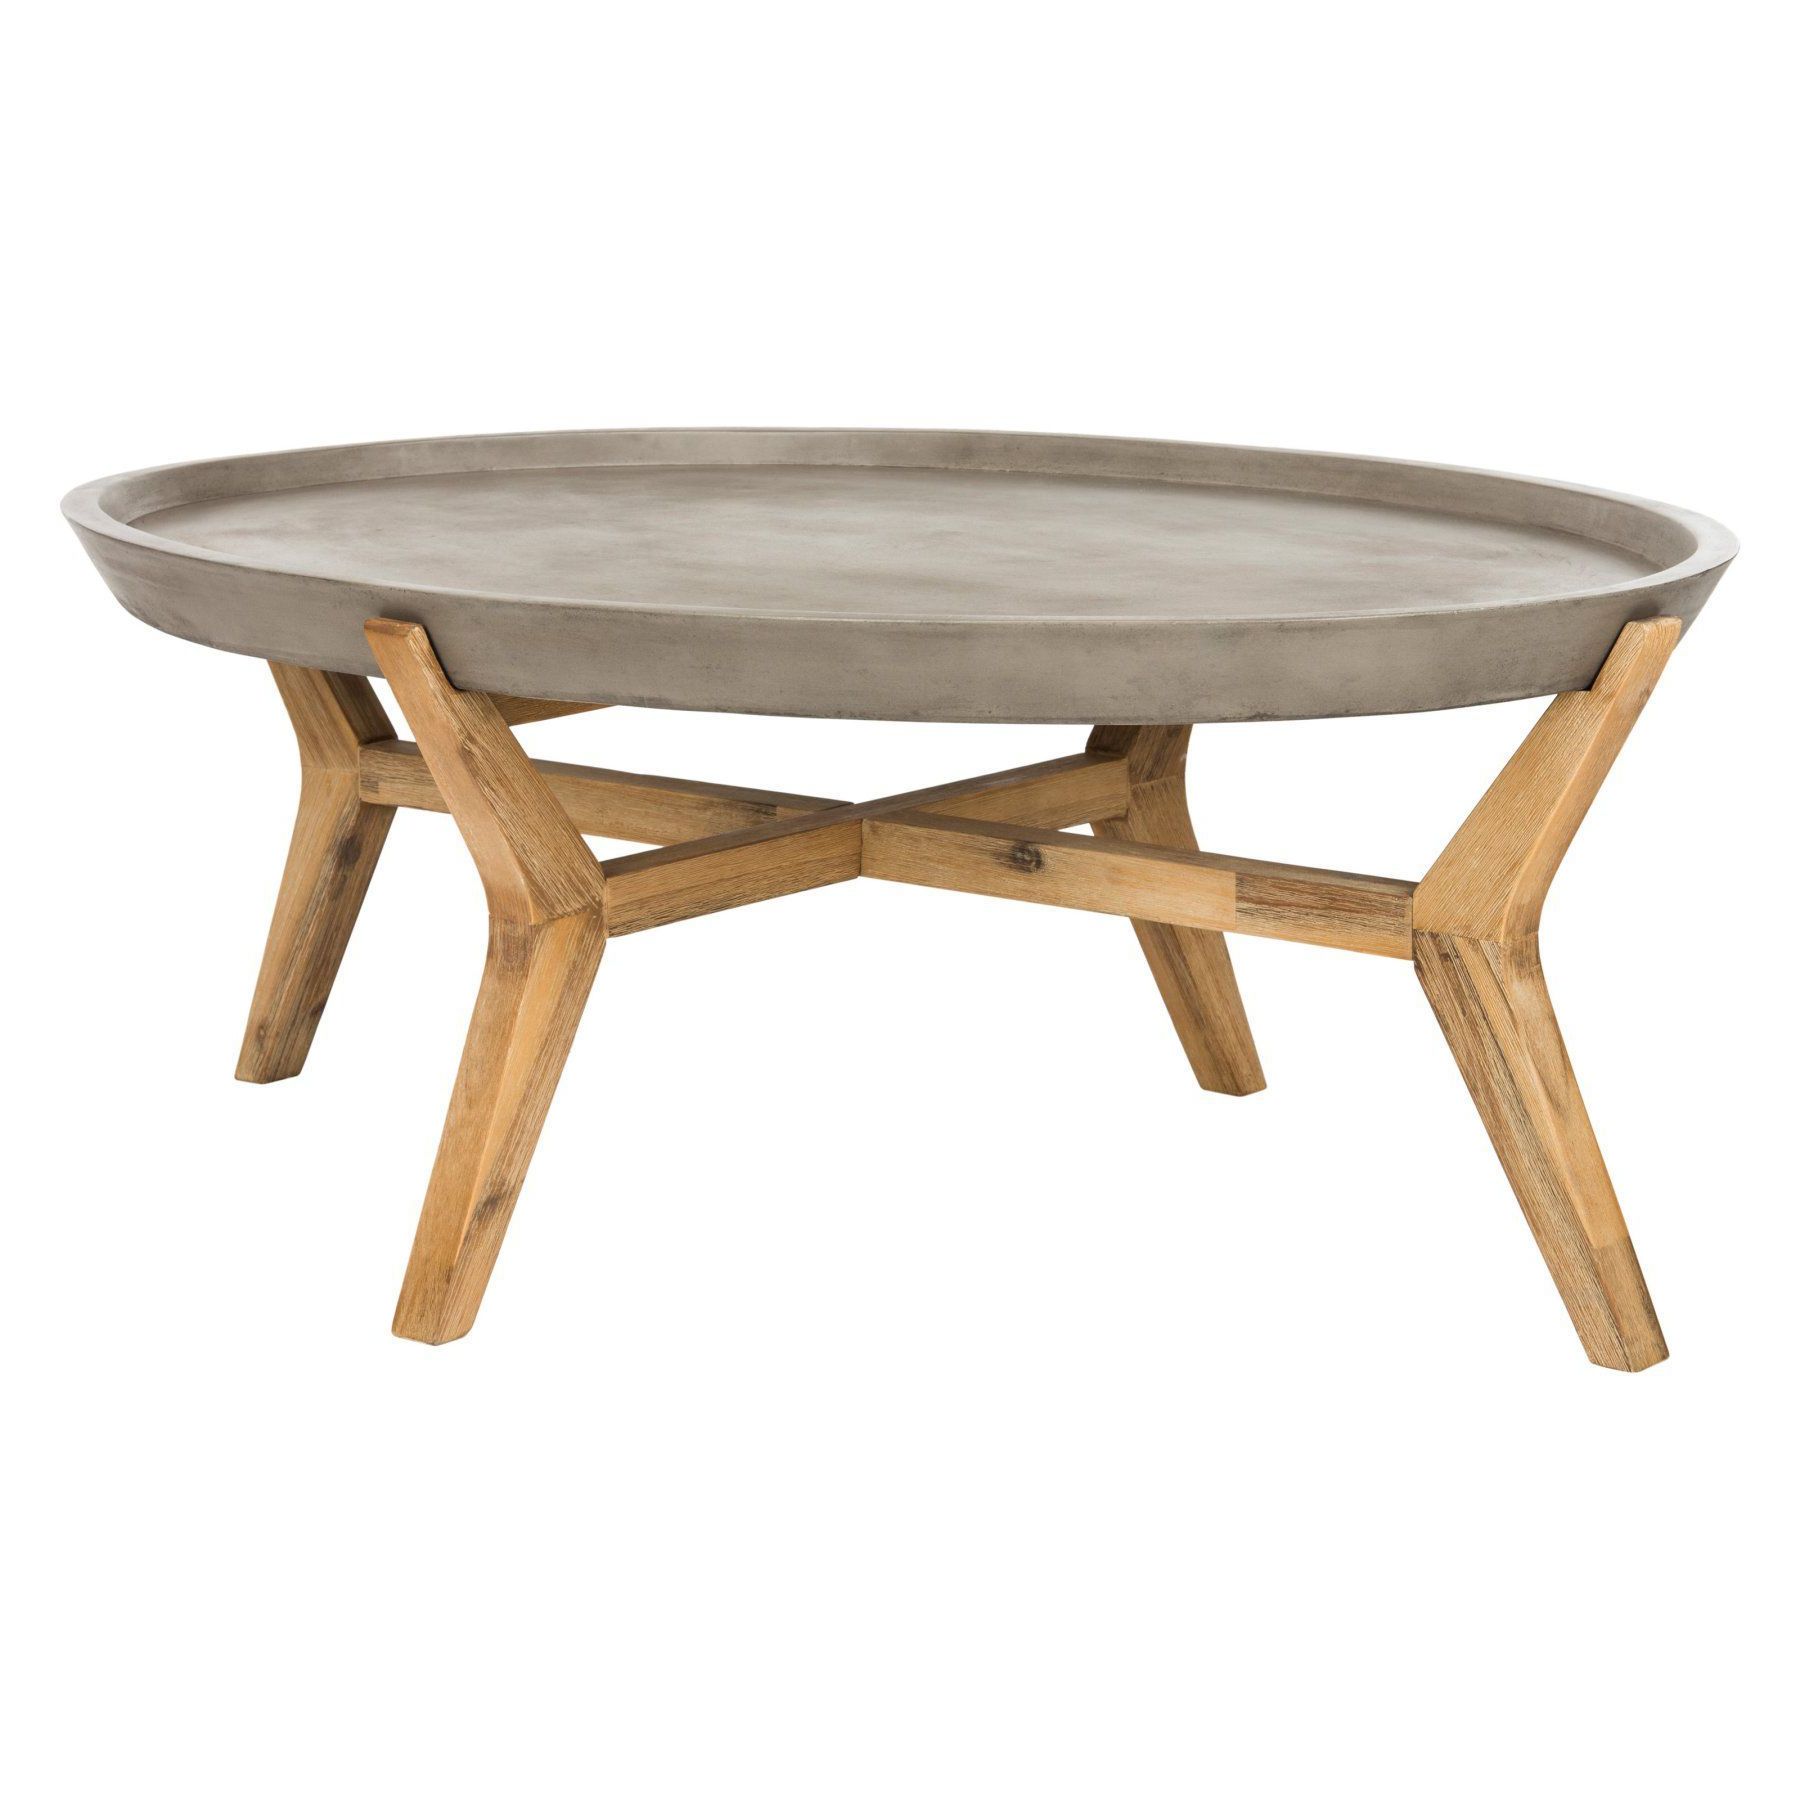 Safavieh Hadwin Modern Concrete Oval Coffee Table (with Intended For Current Modern Concrete Coffee Tables (Gallery 13 of 20)